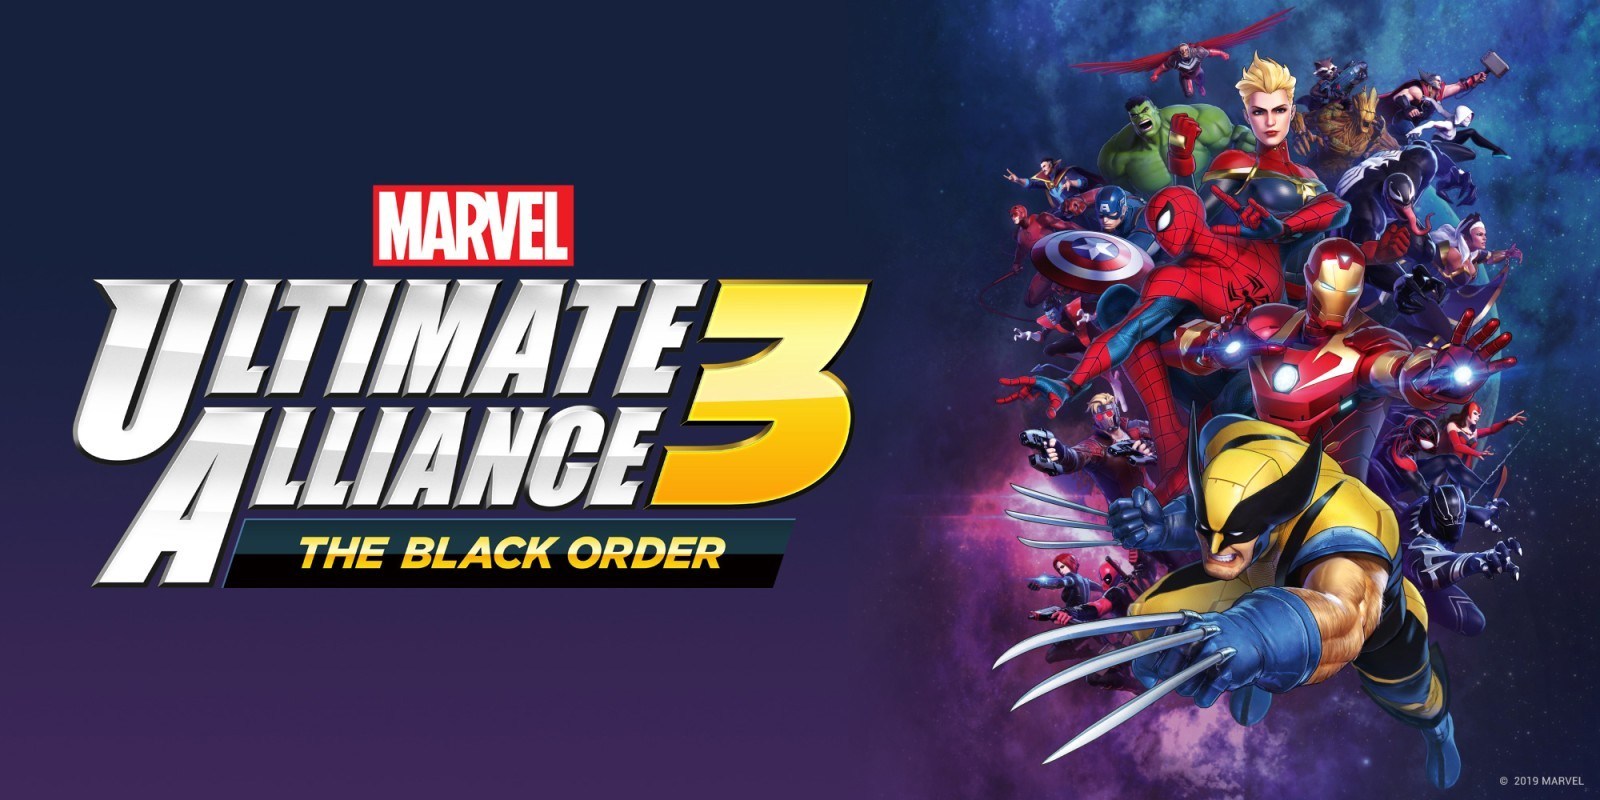 How To Defeat Dormammu Marvel Ultimate Alliance 3 The